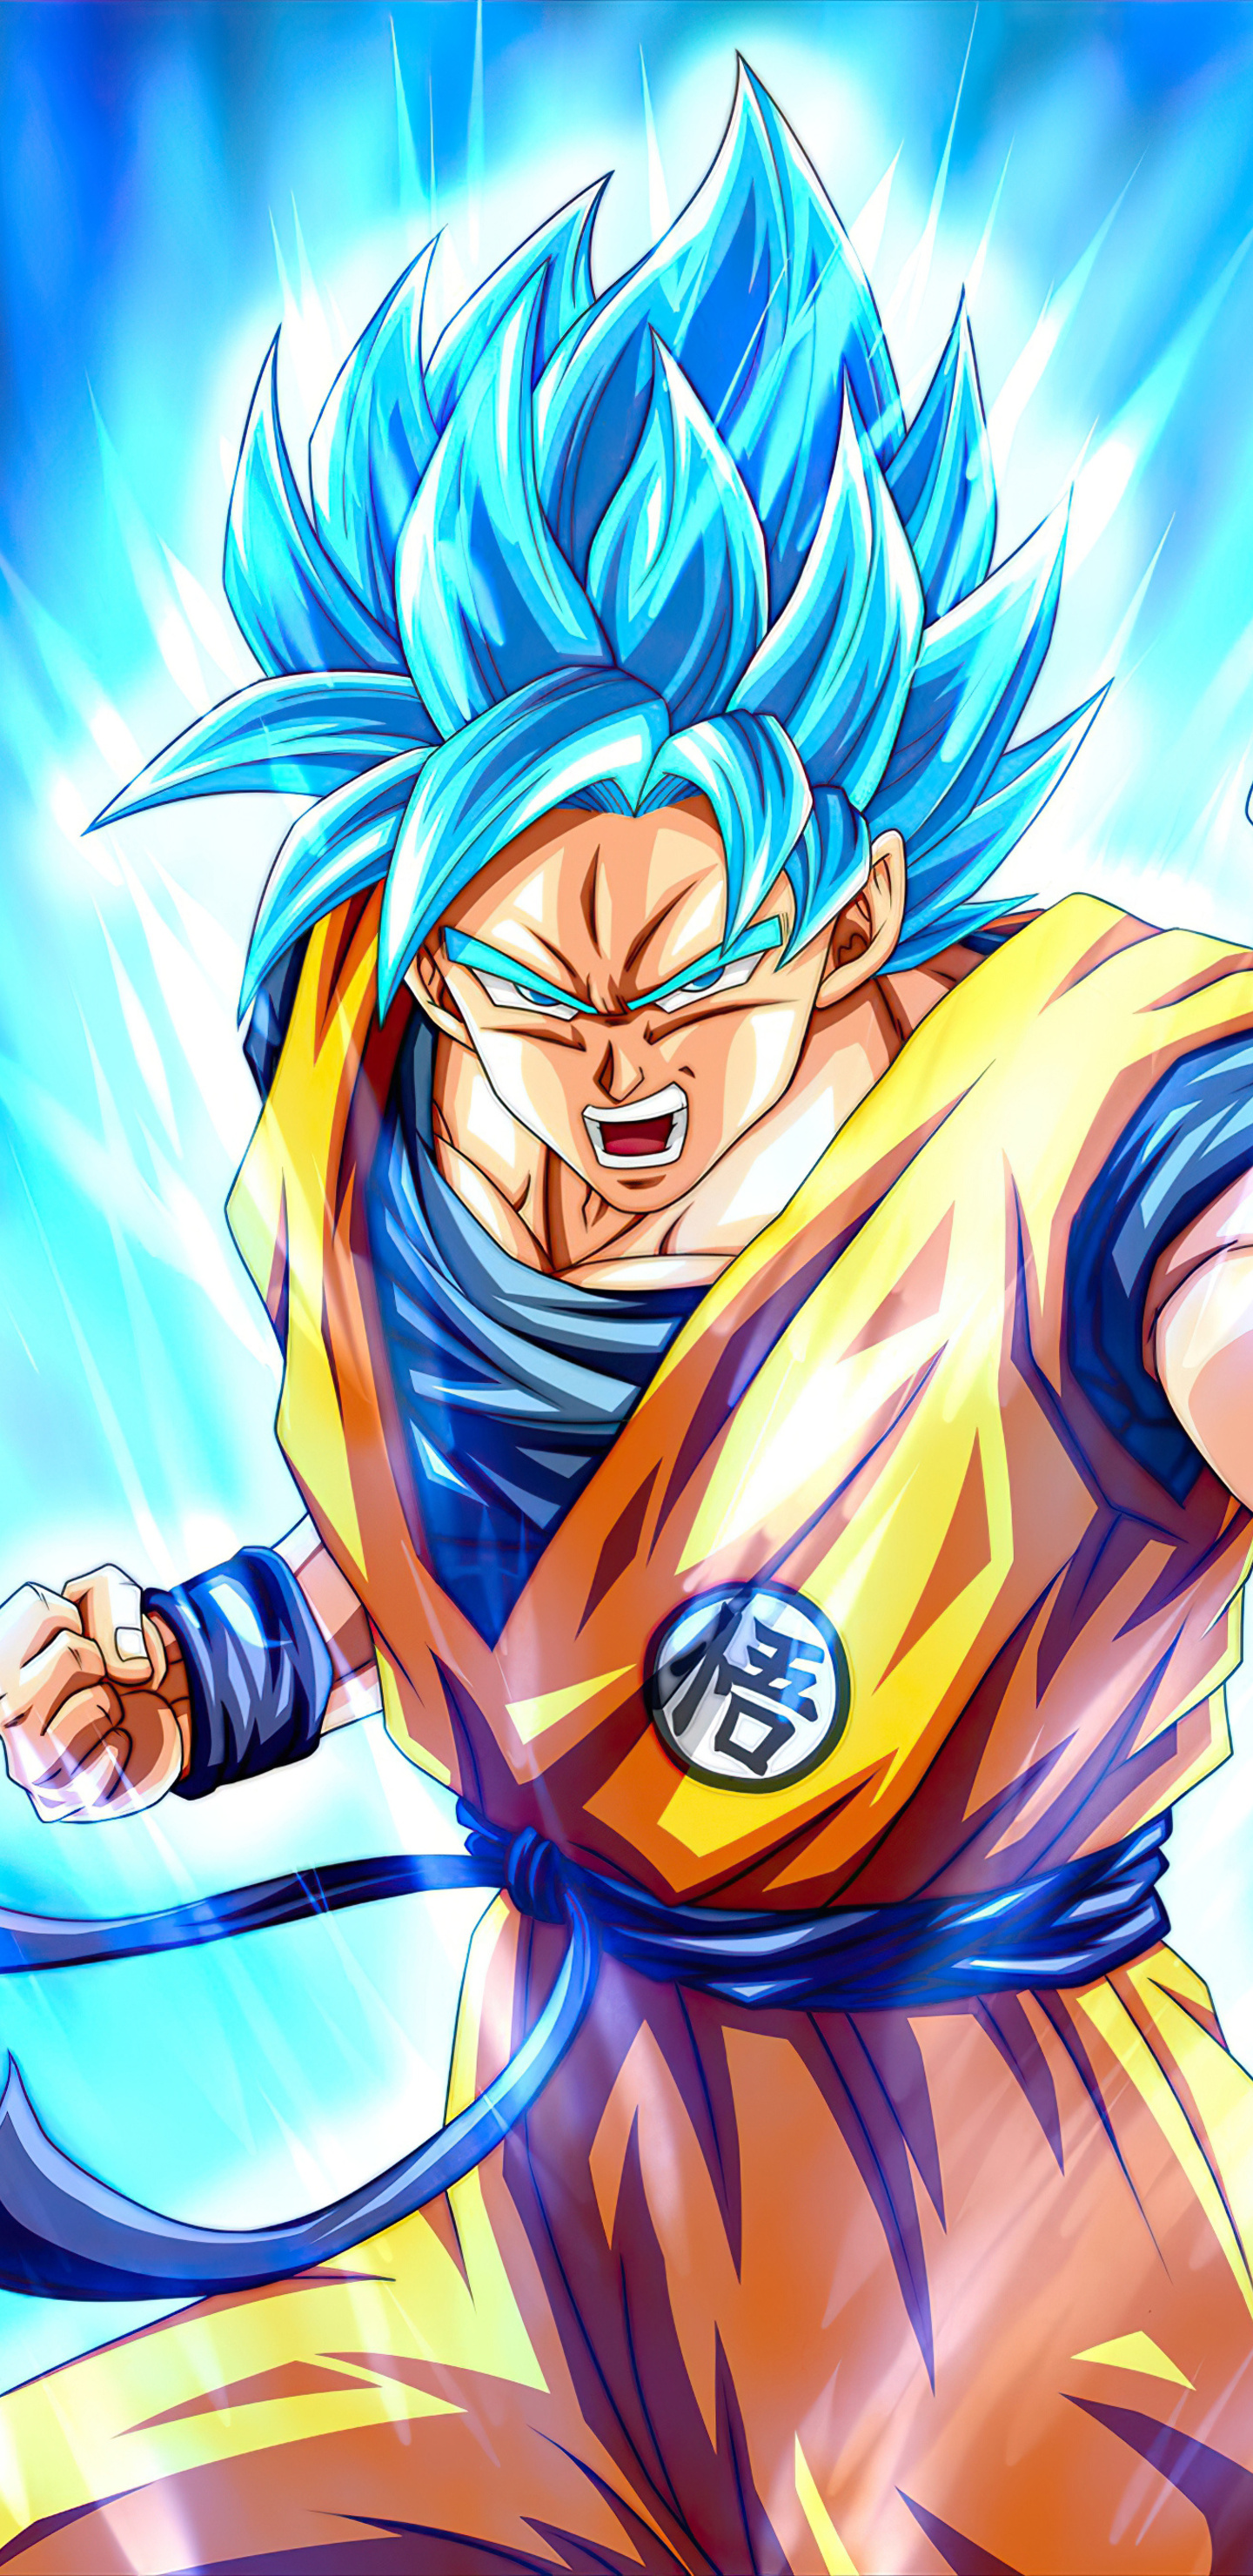 Dragon Ball Son Goku 4k Samsung Galaxy Note S S SQHD HD 4k Wallpaper, Image, Background, Photo and Picture